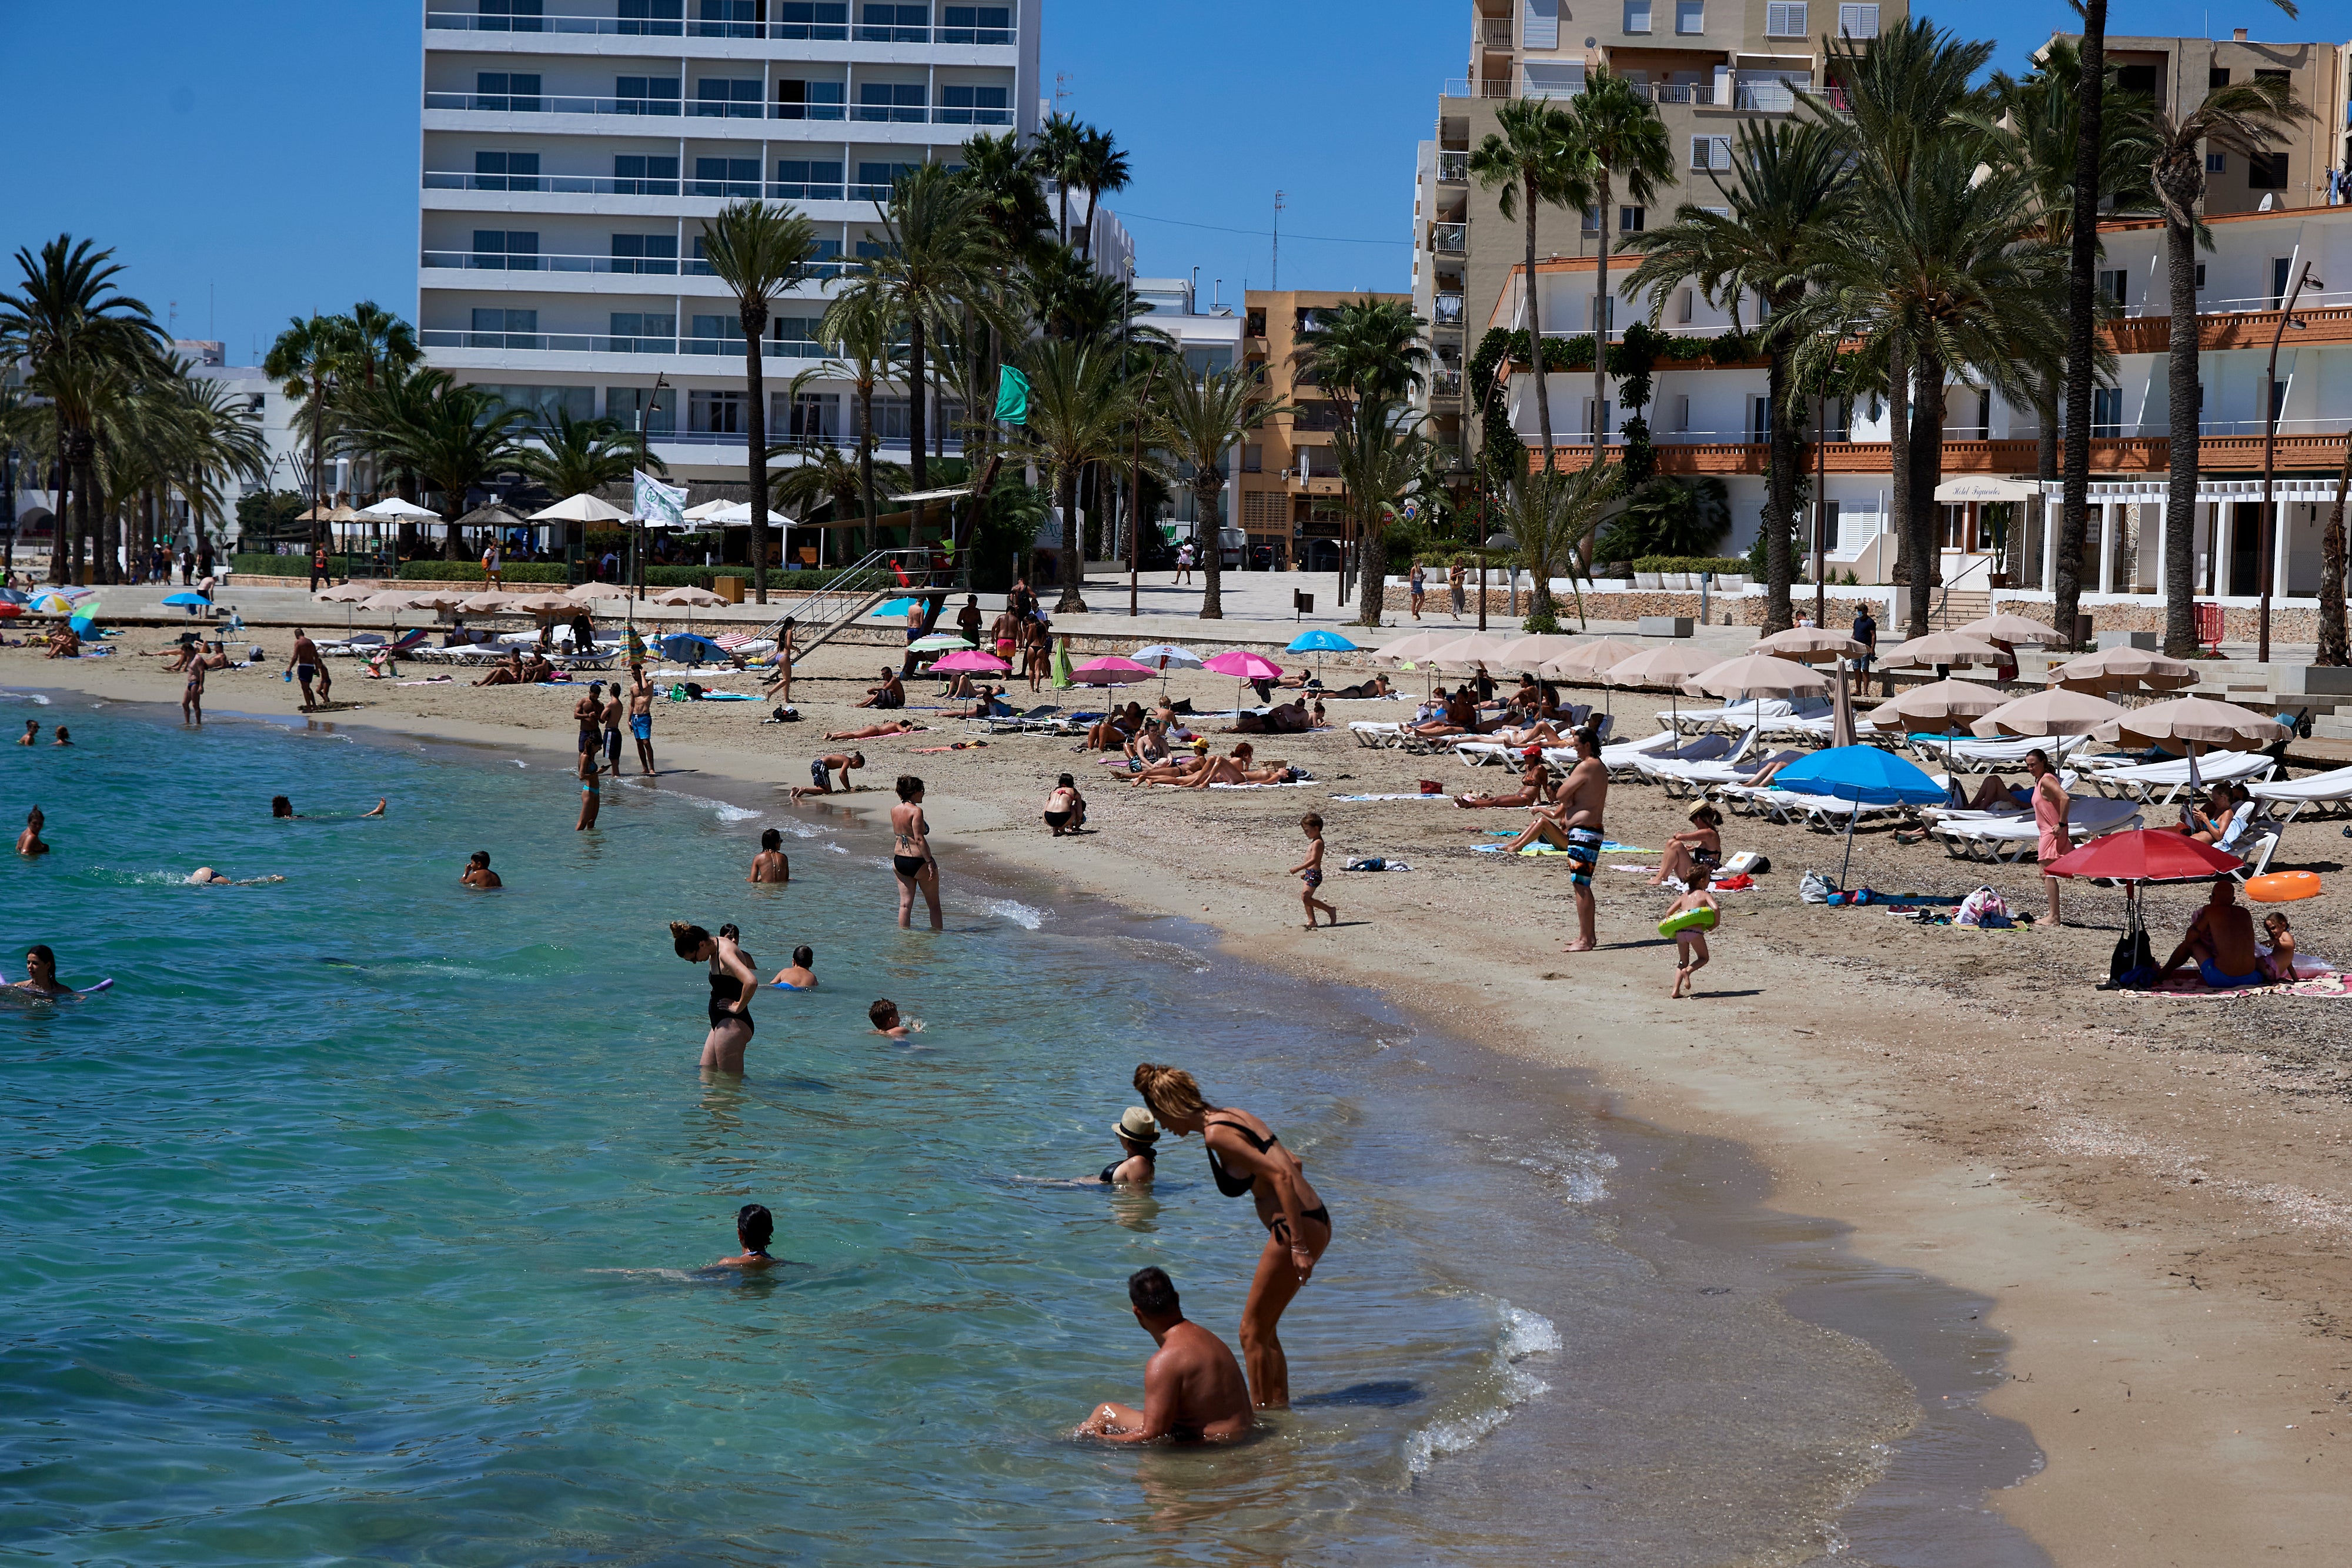 Could Ibiza be on the green list this summer?